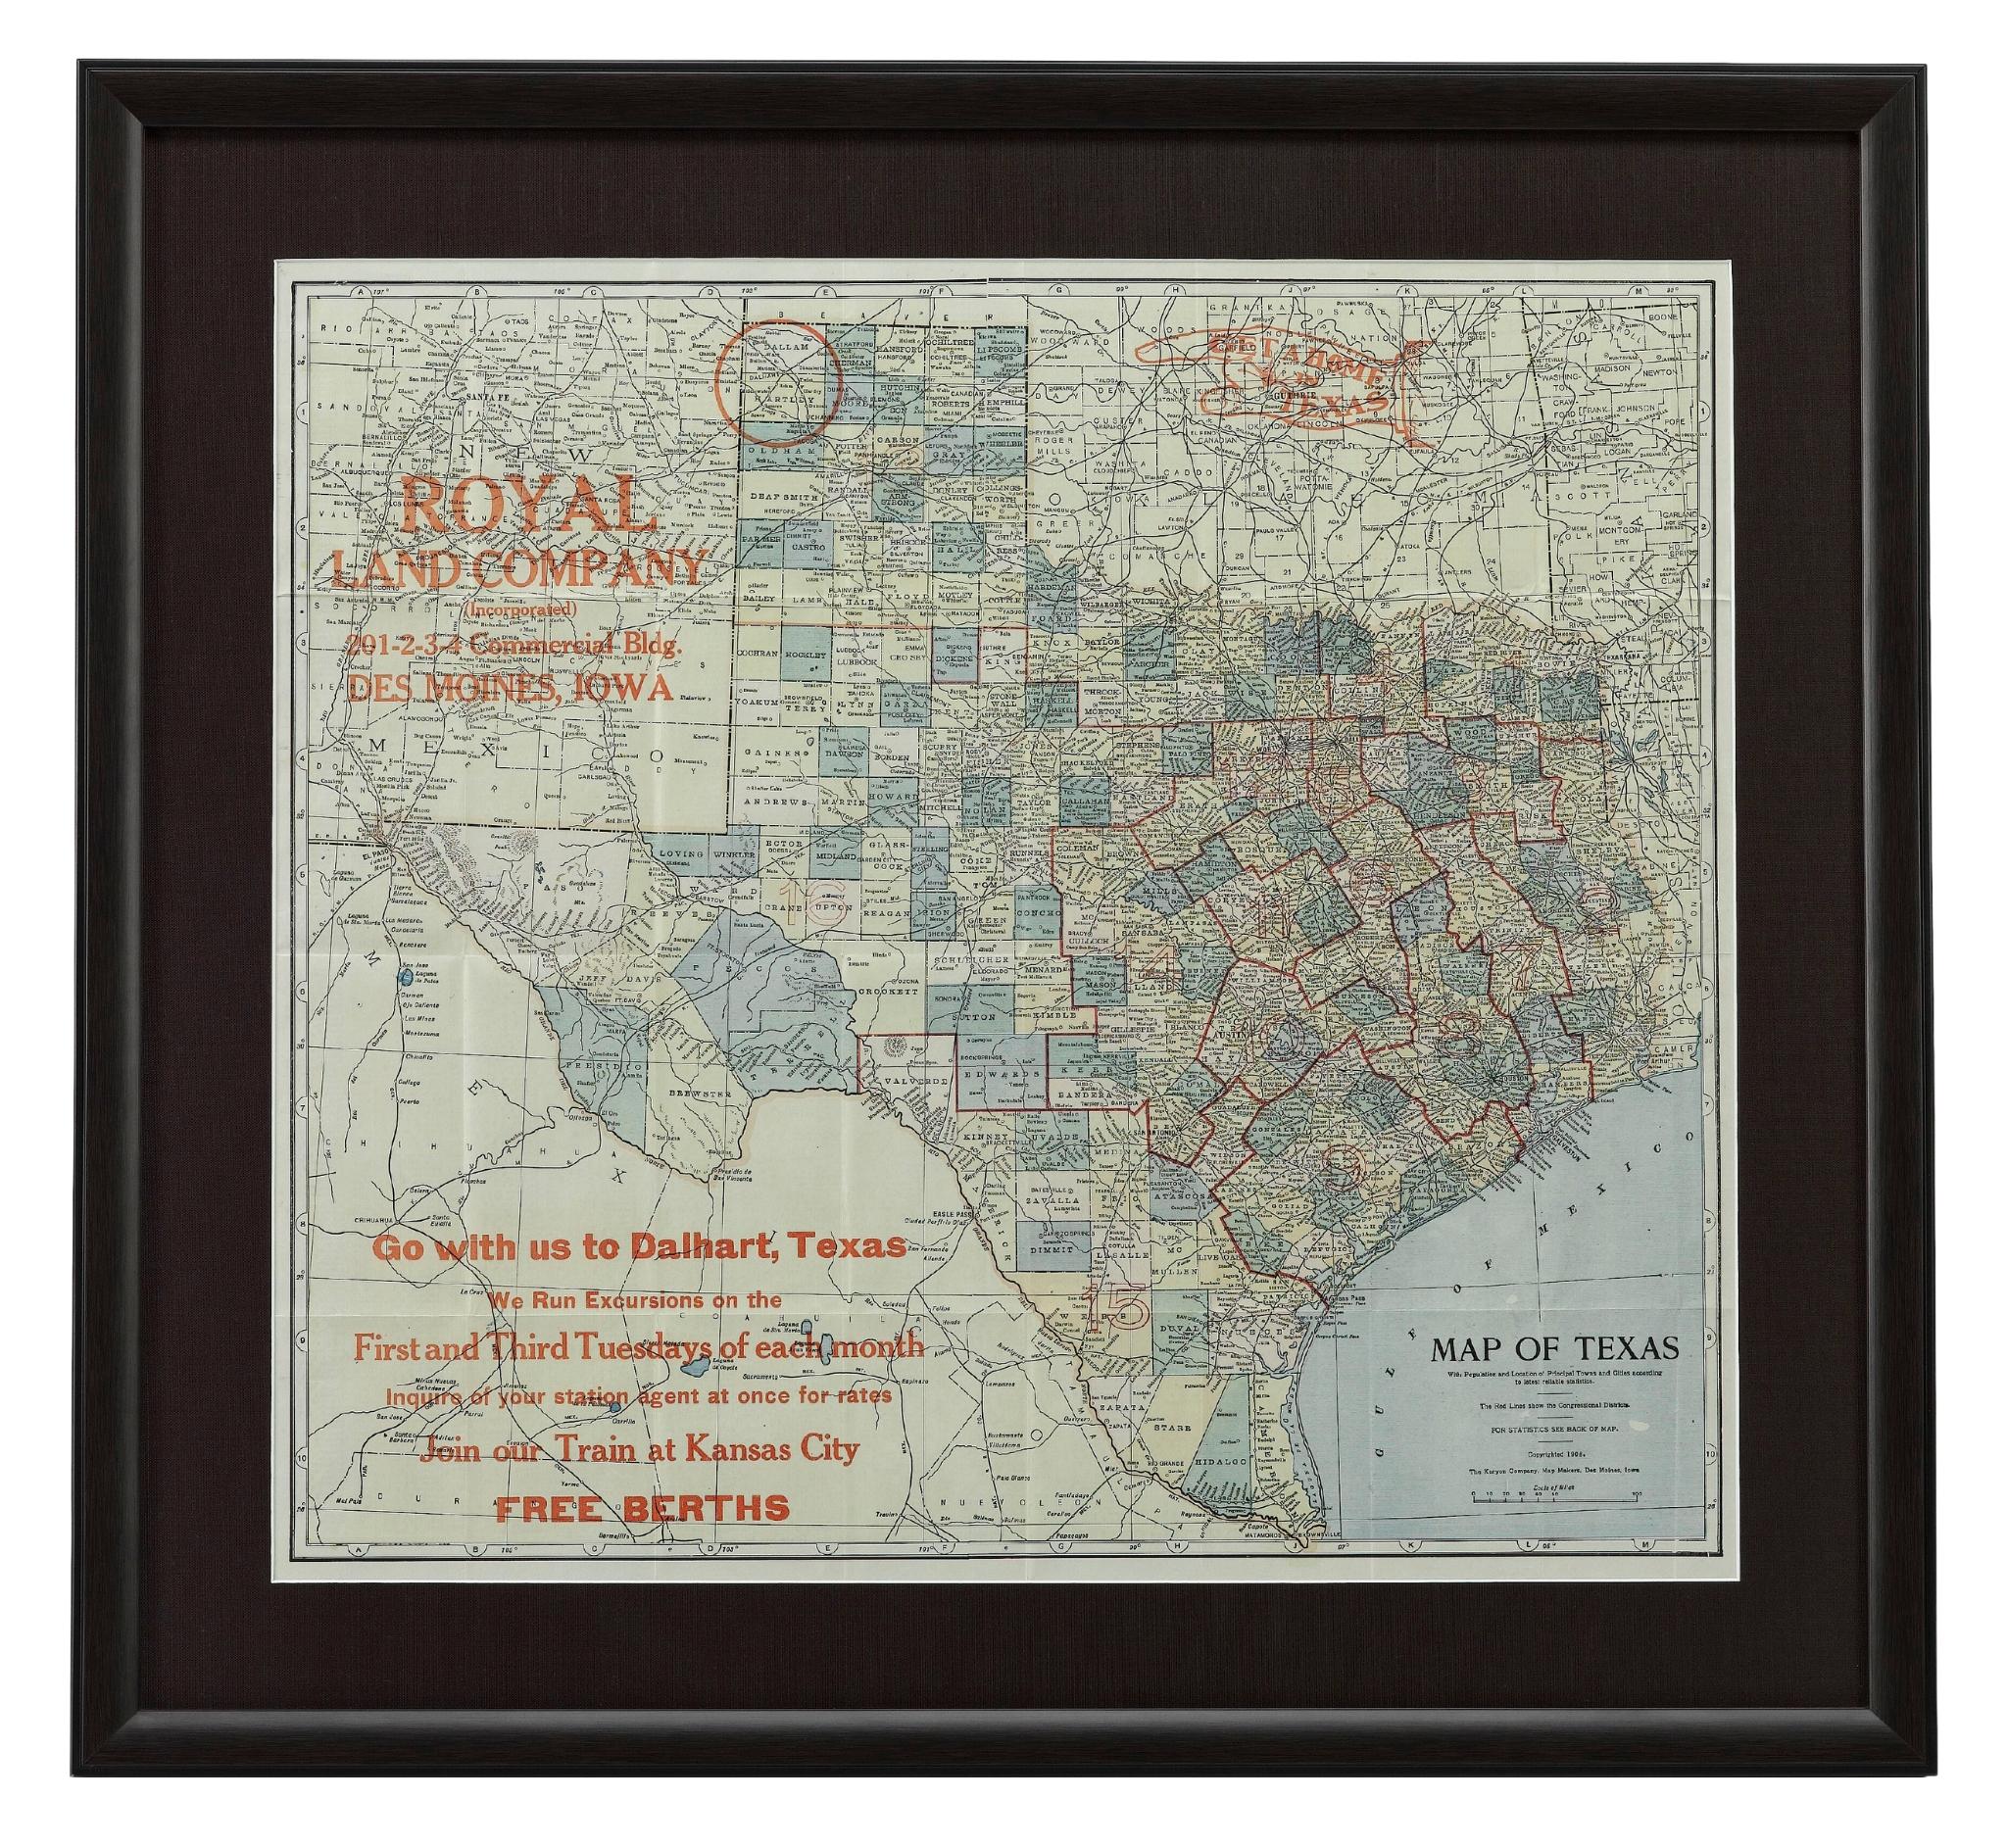 Presented is an antique map of the state of Texas, printed as a pocket map in 1908 by The Kenyon Company. The state map is brightly colored by county, with principal cities and towns listed. The congressional districts are numbered and boldly